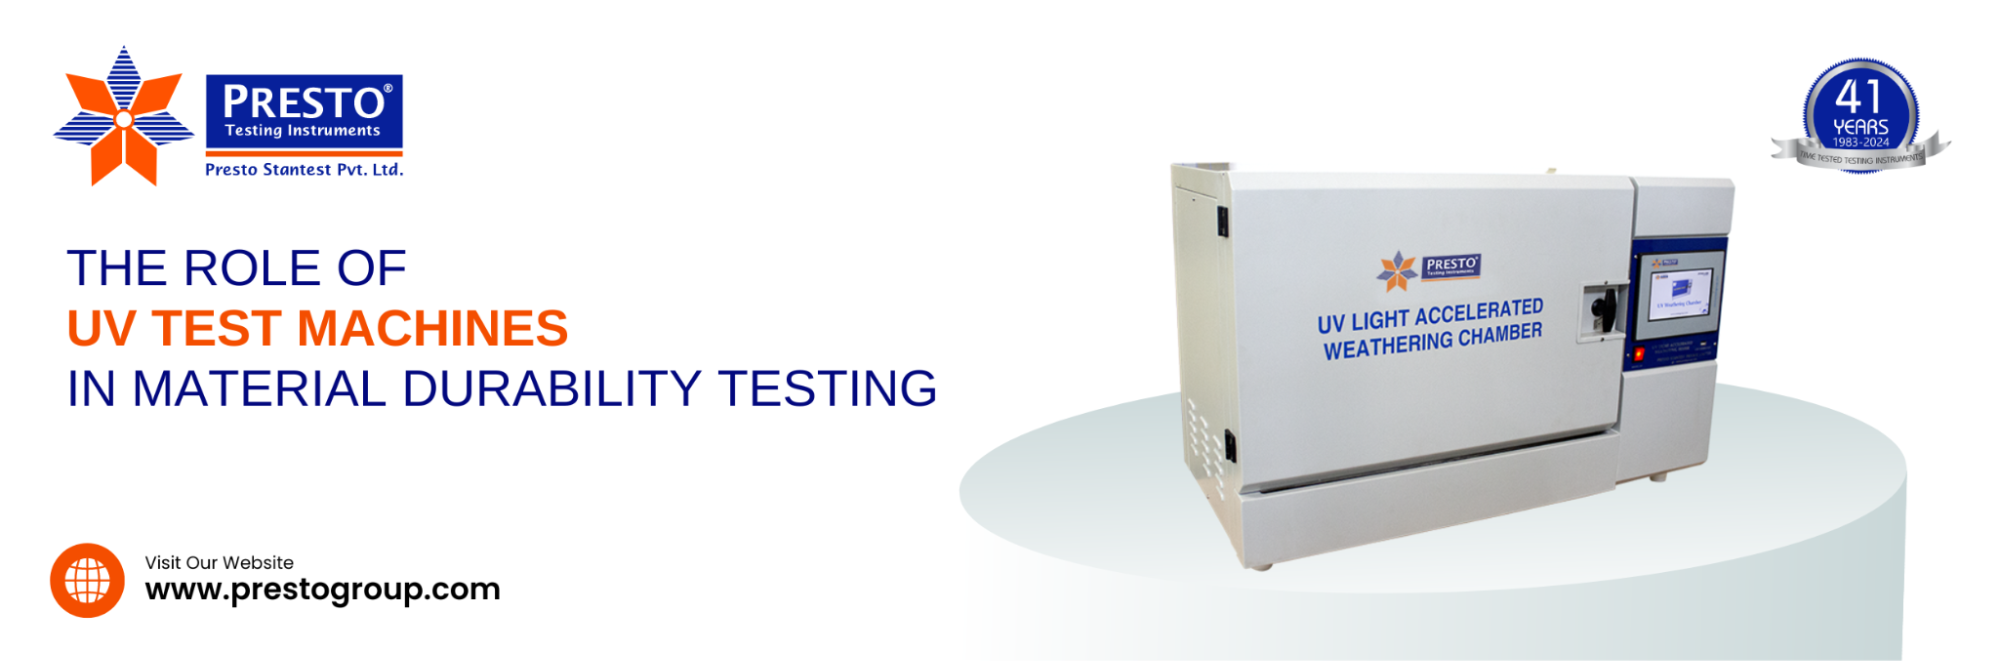 The Role of UV Test Machines in Material Durability Testing